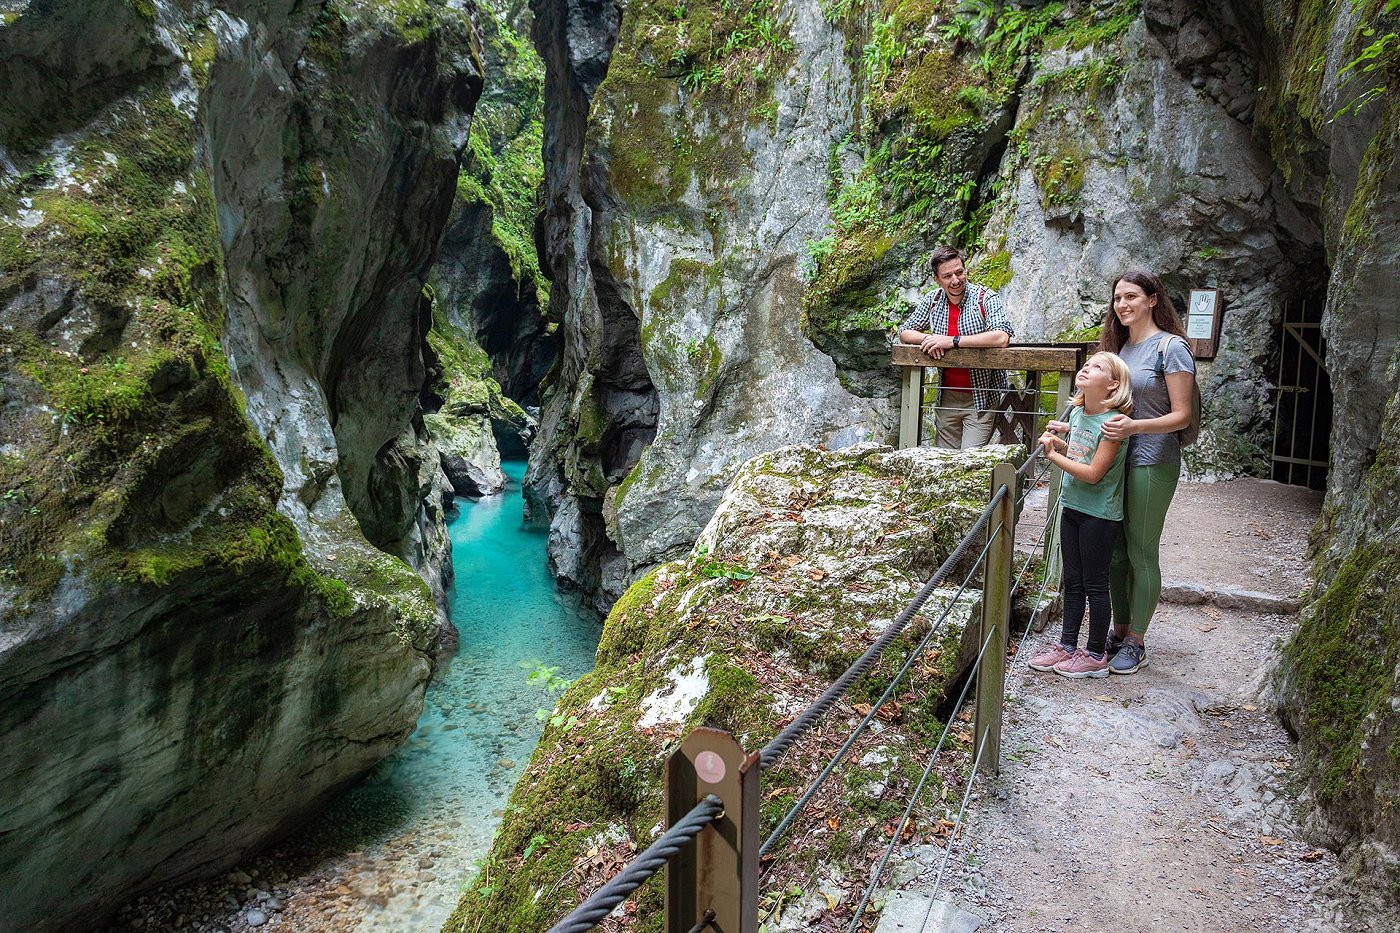 The family enjoys the views of the deep Tolmin Gorges